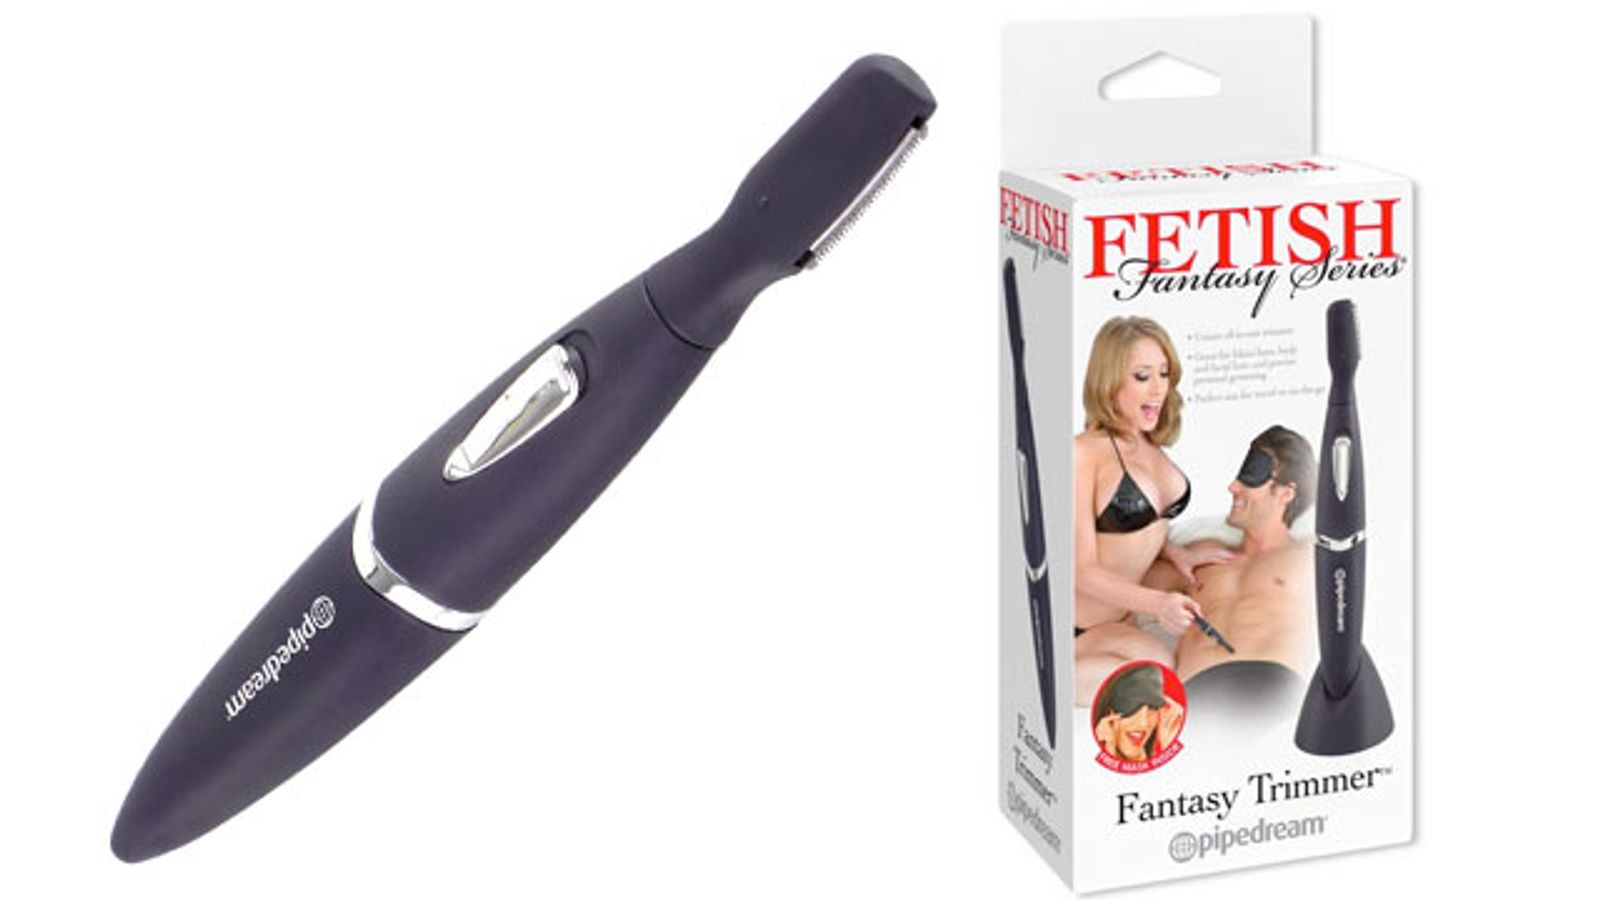 Pipedream Products’ Fantasy Trimmer Now in Stock and Shipping